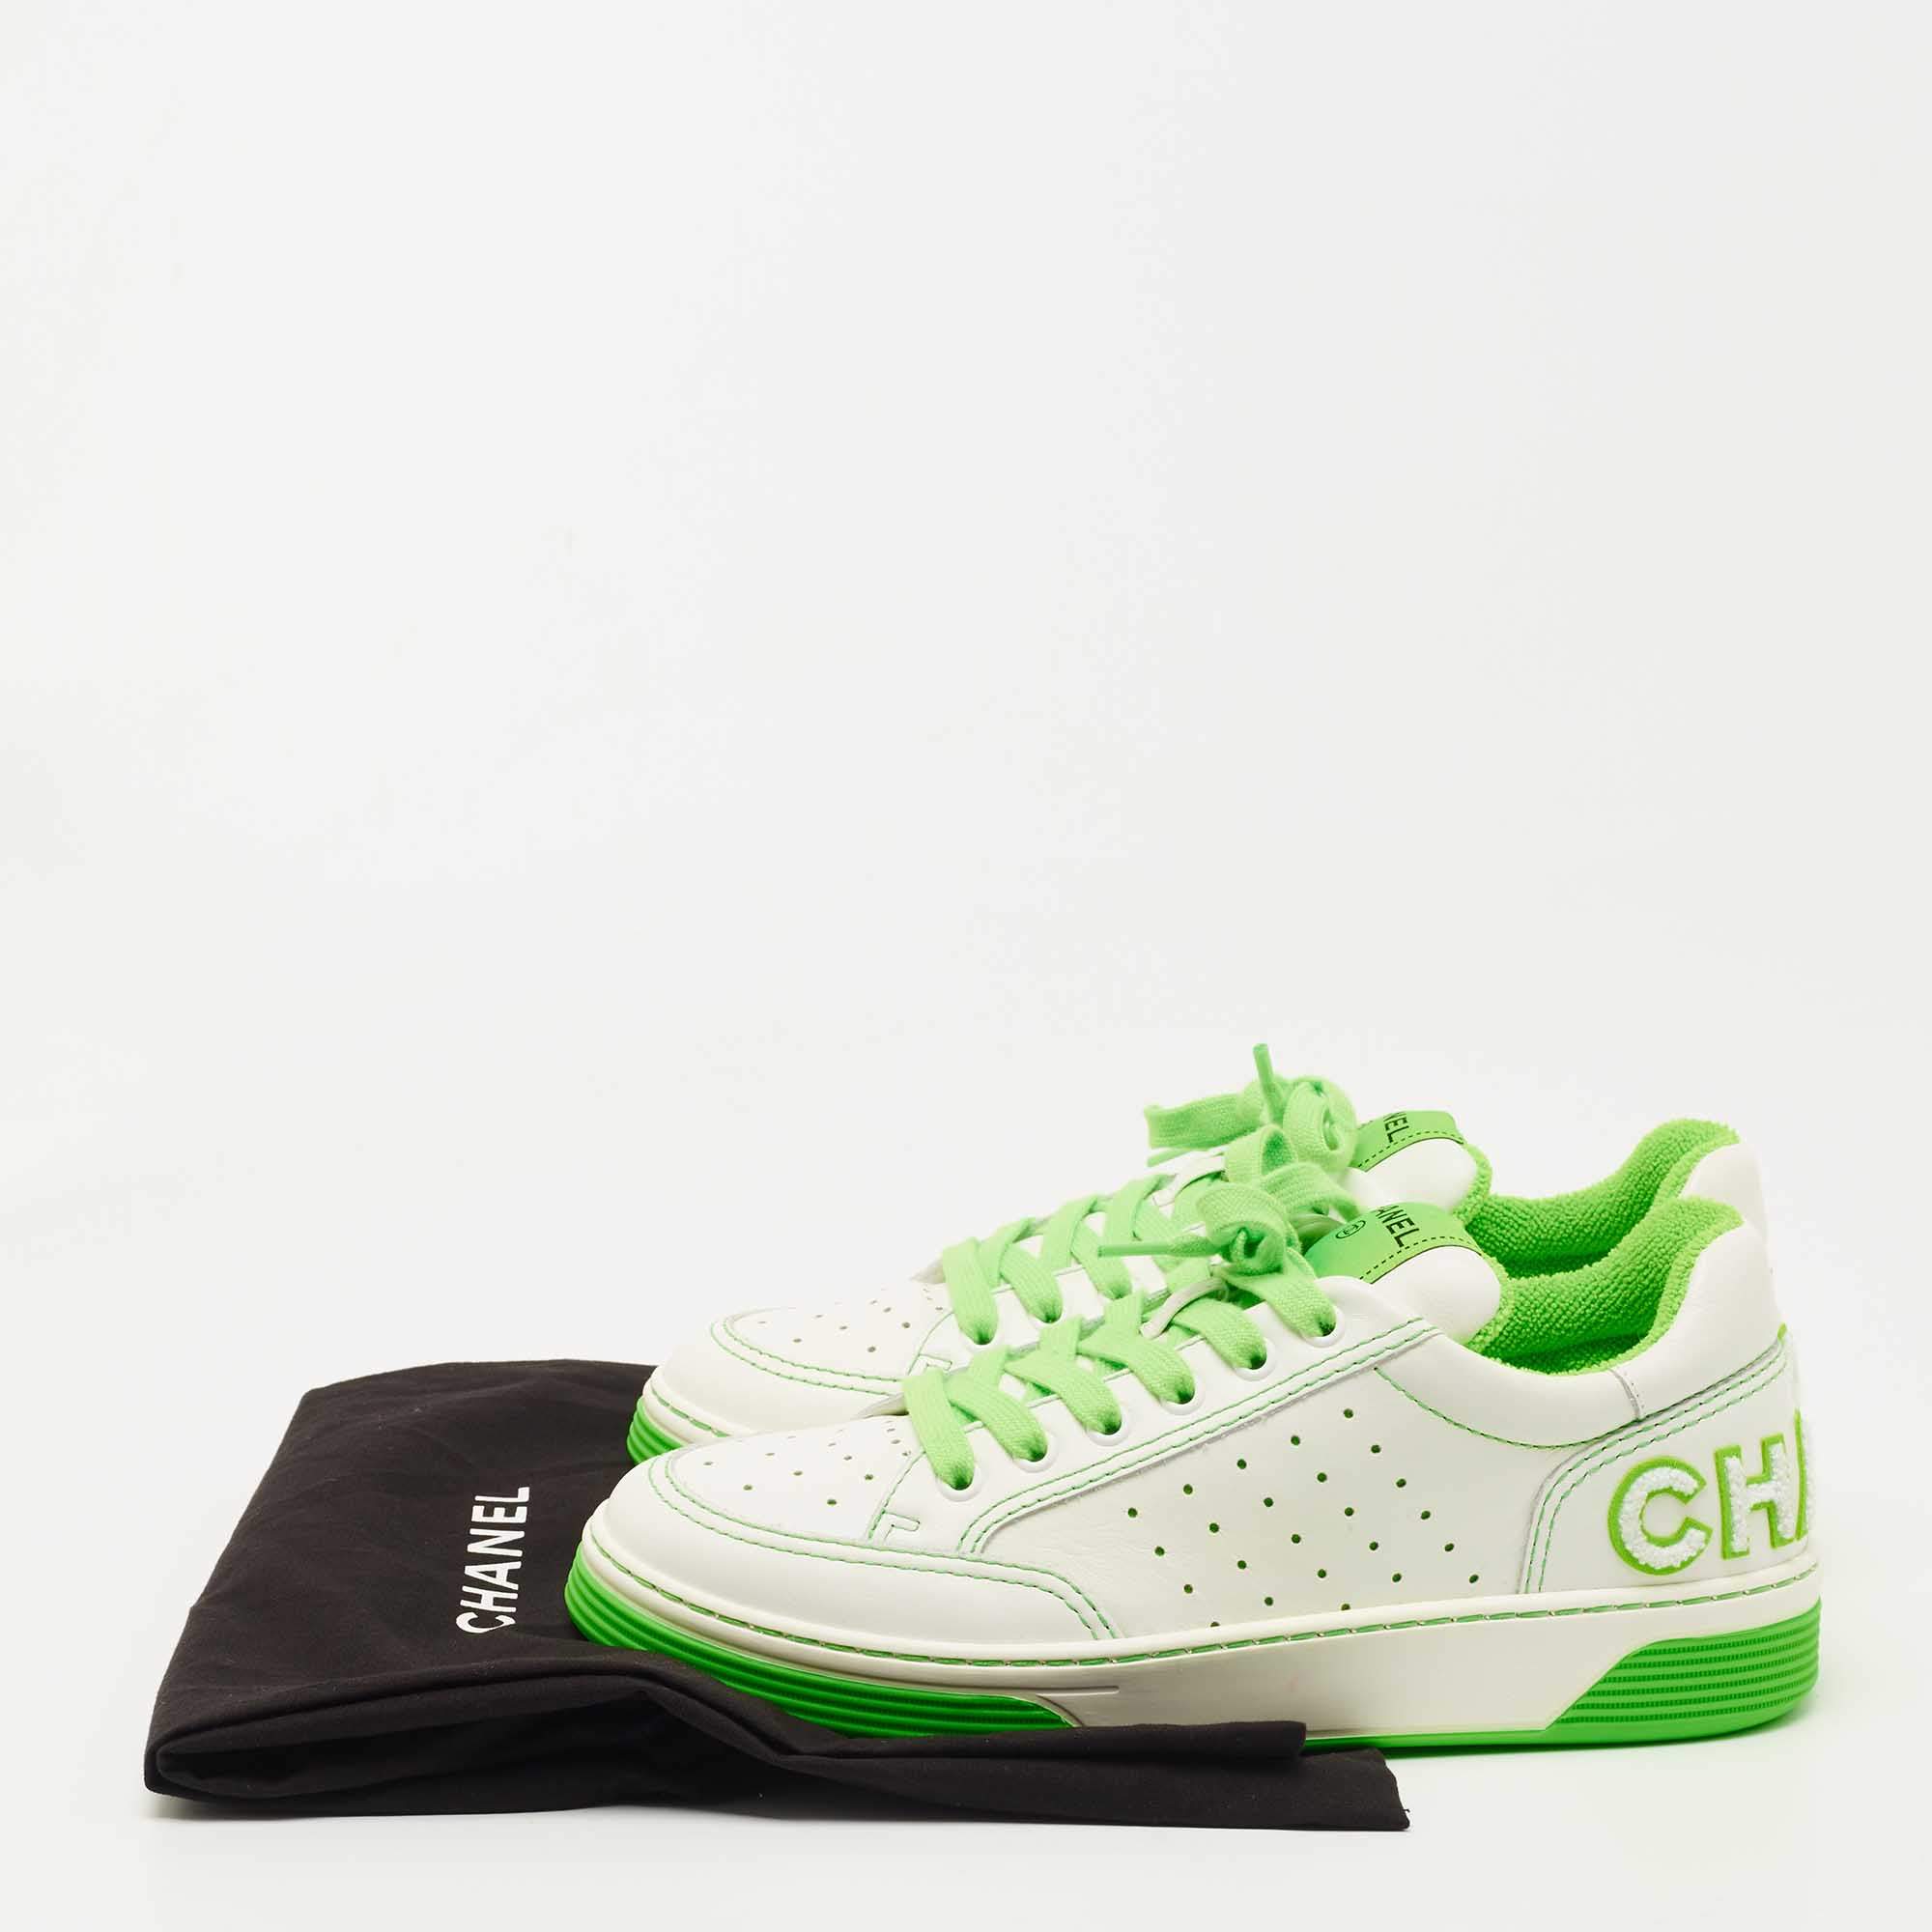 Chanel White/Neon Green Leather 22P Trainer Sneakers Size 38.5 Chanel